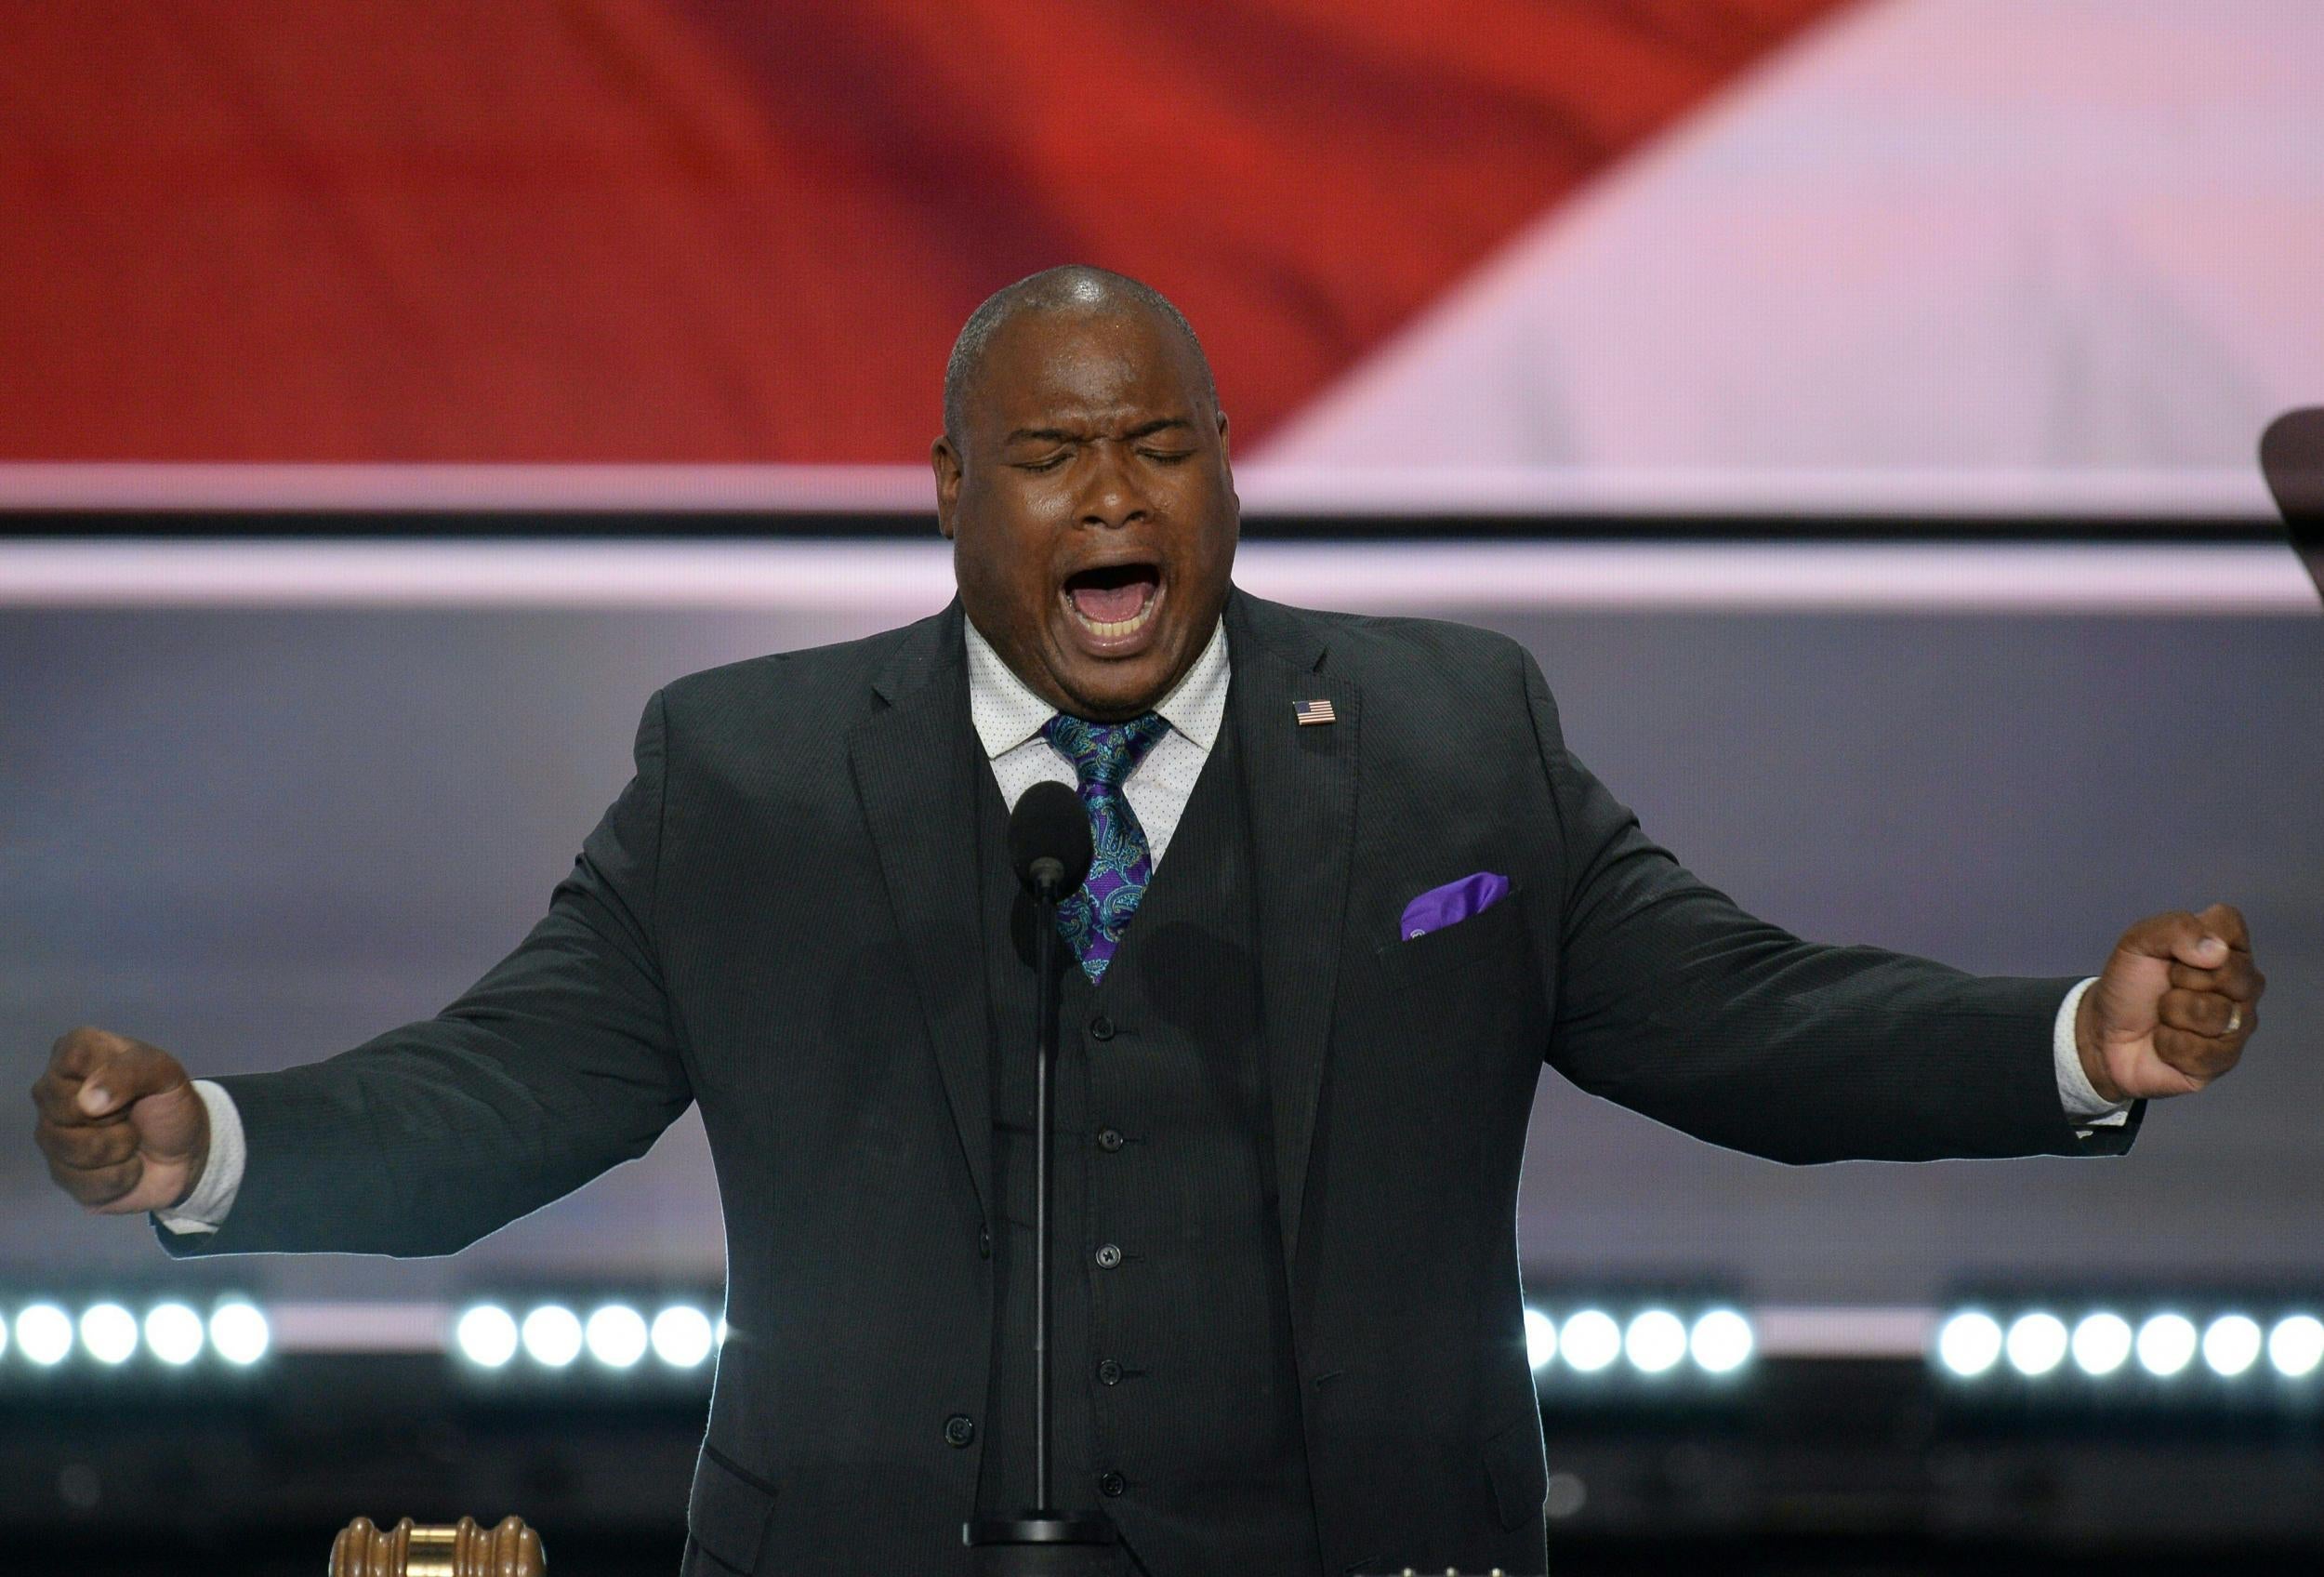 Pastor Burns asks God for help to defeat the ‘enemy’ Hillary Clinton